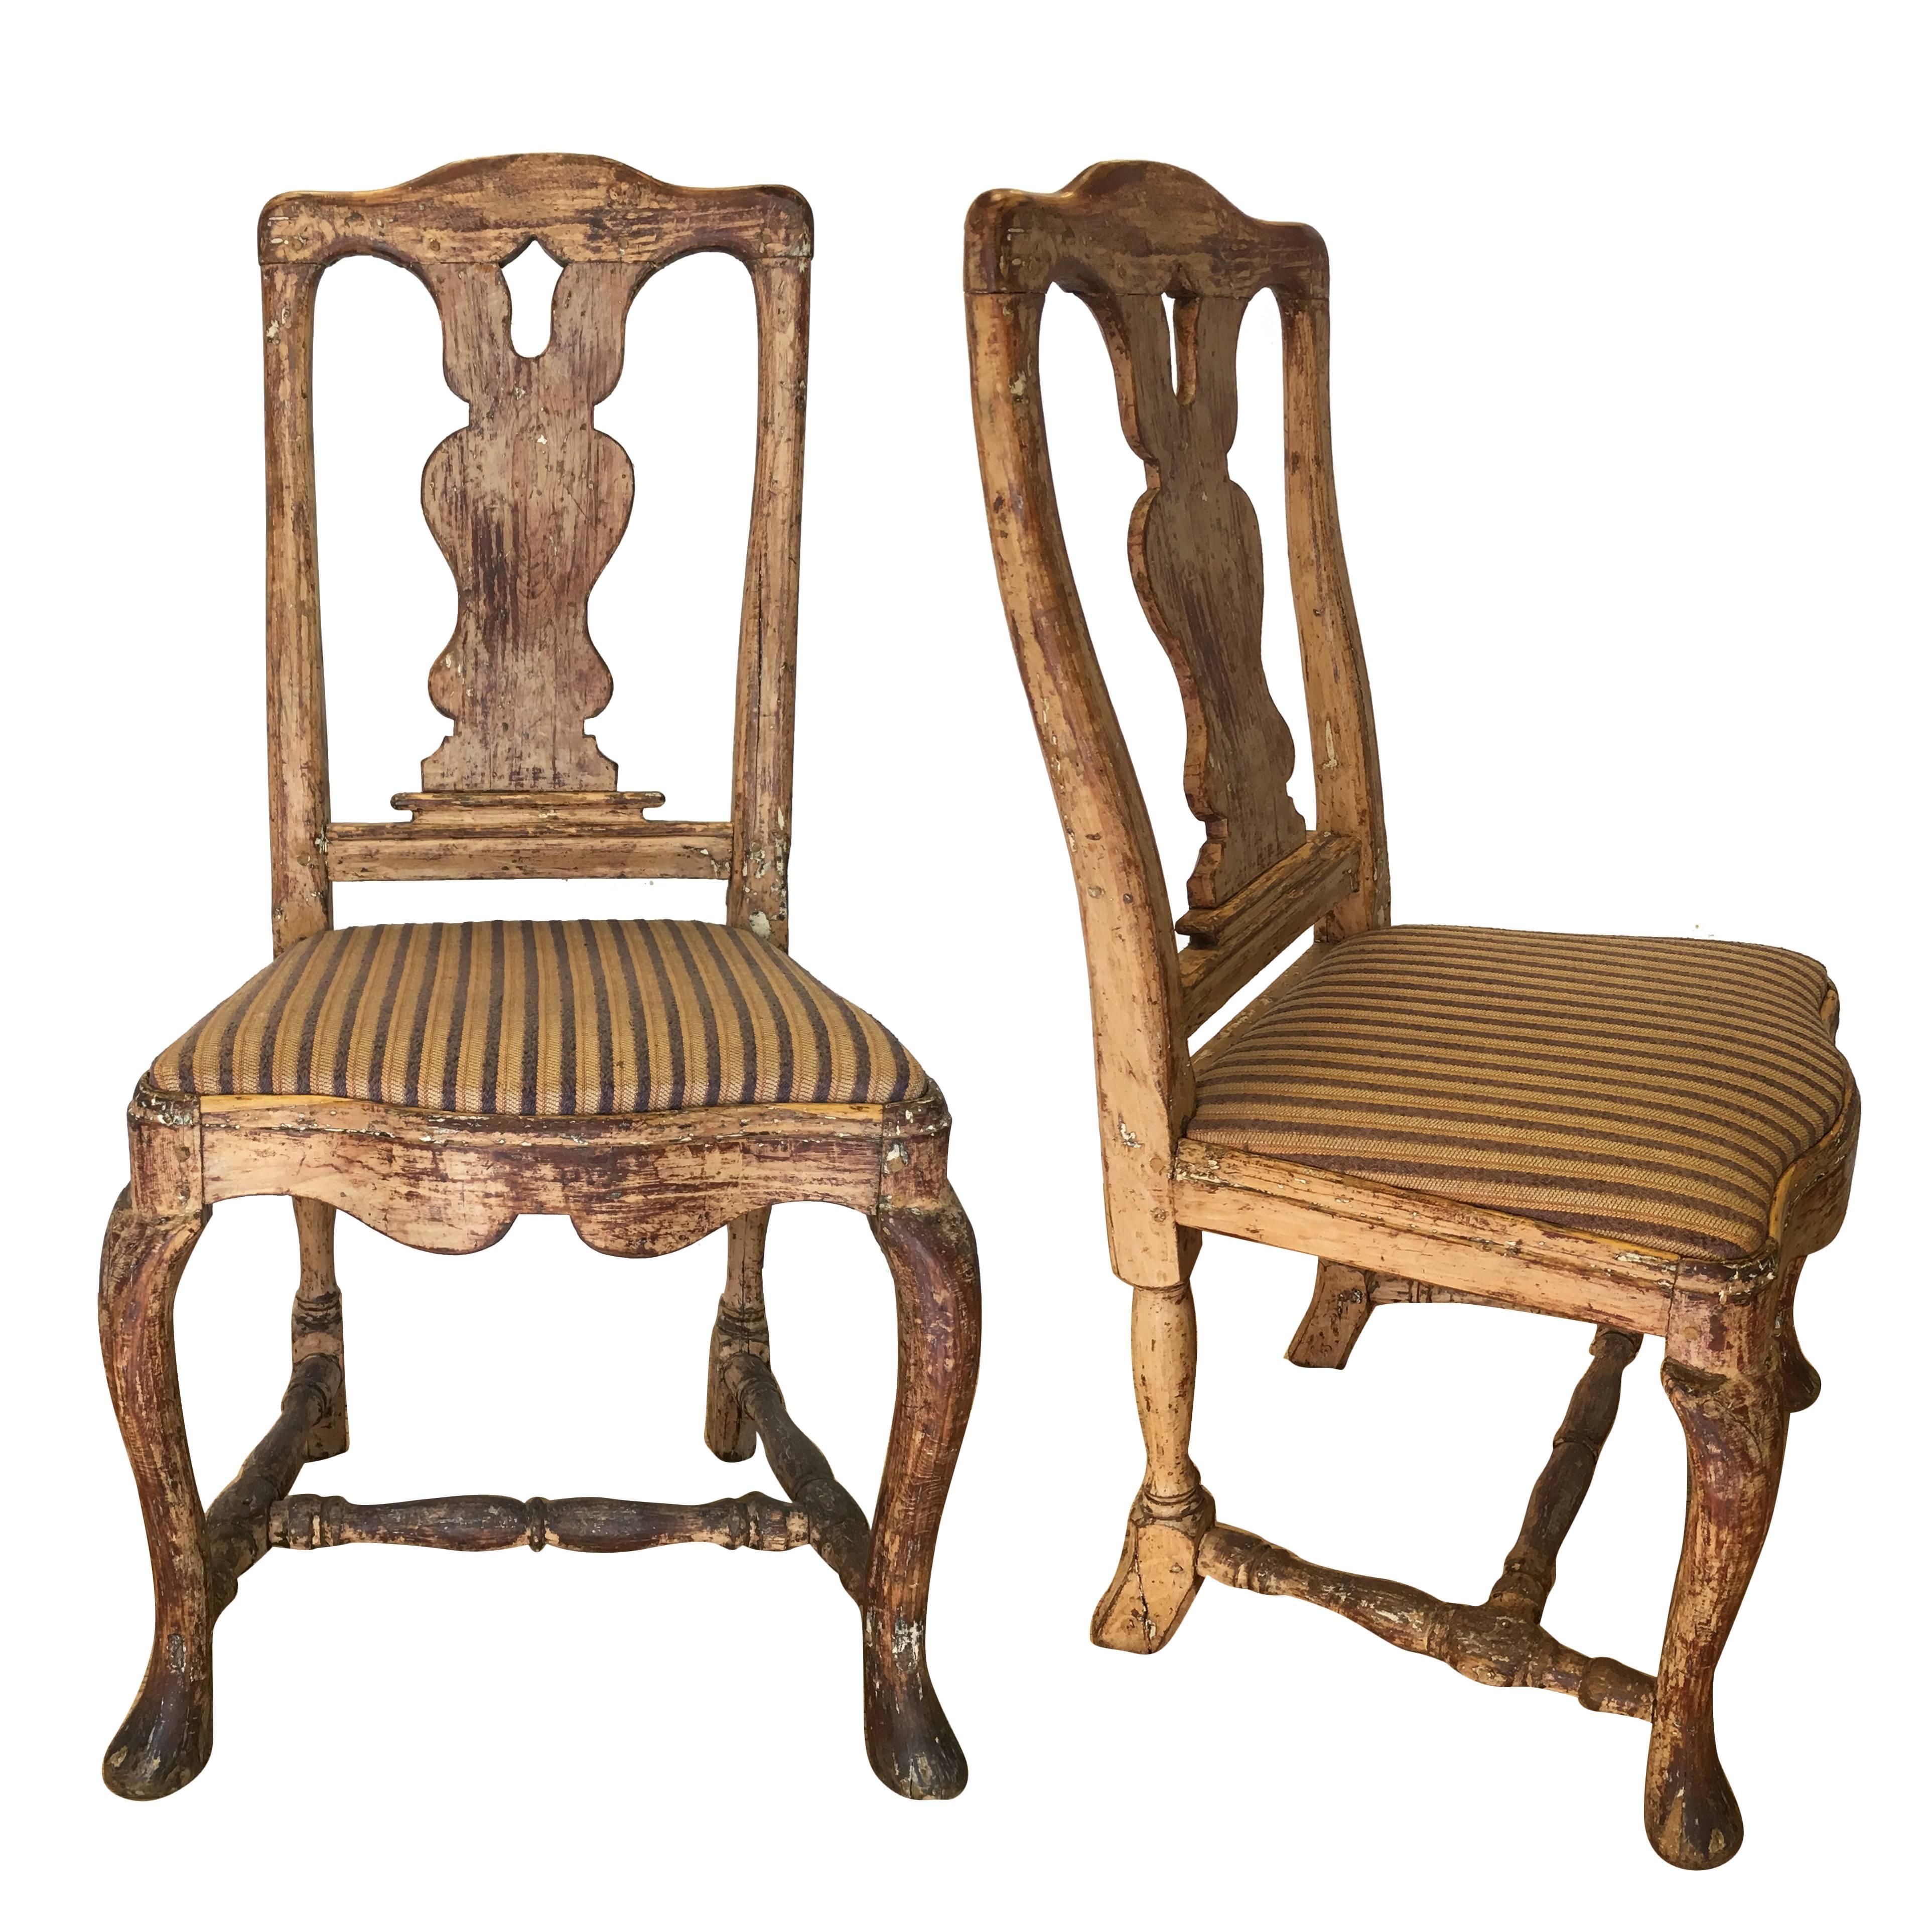 Pair of 18th Century Rococo Chairs, Sweden c. 1740